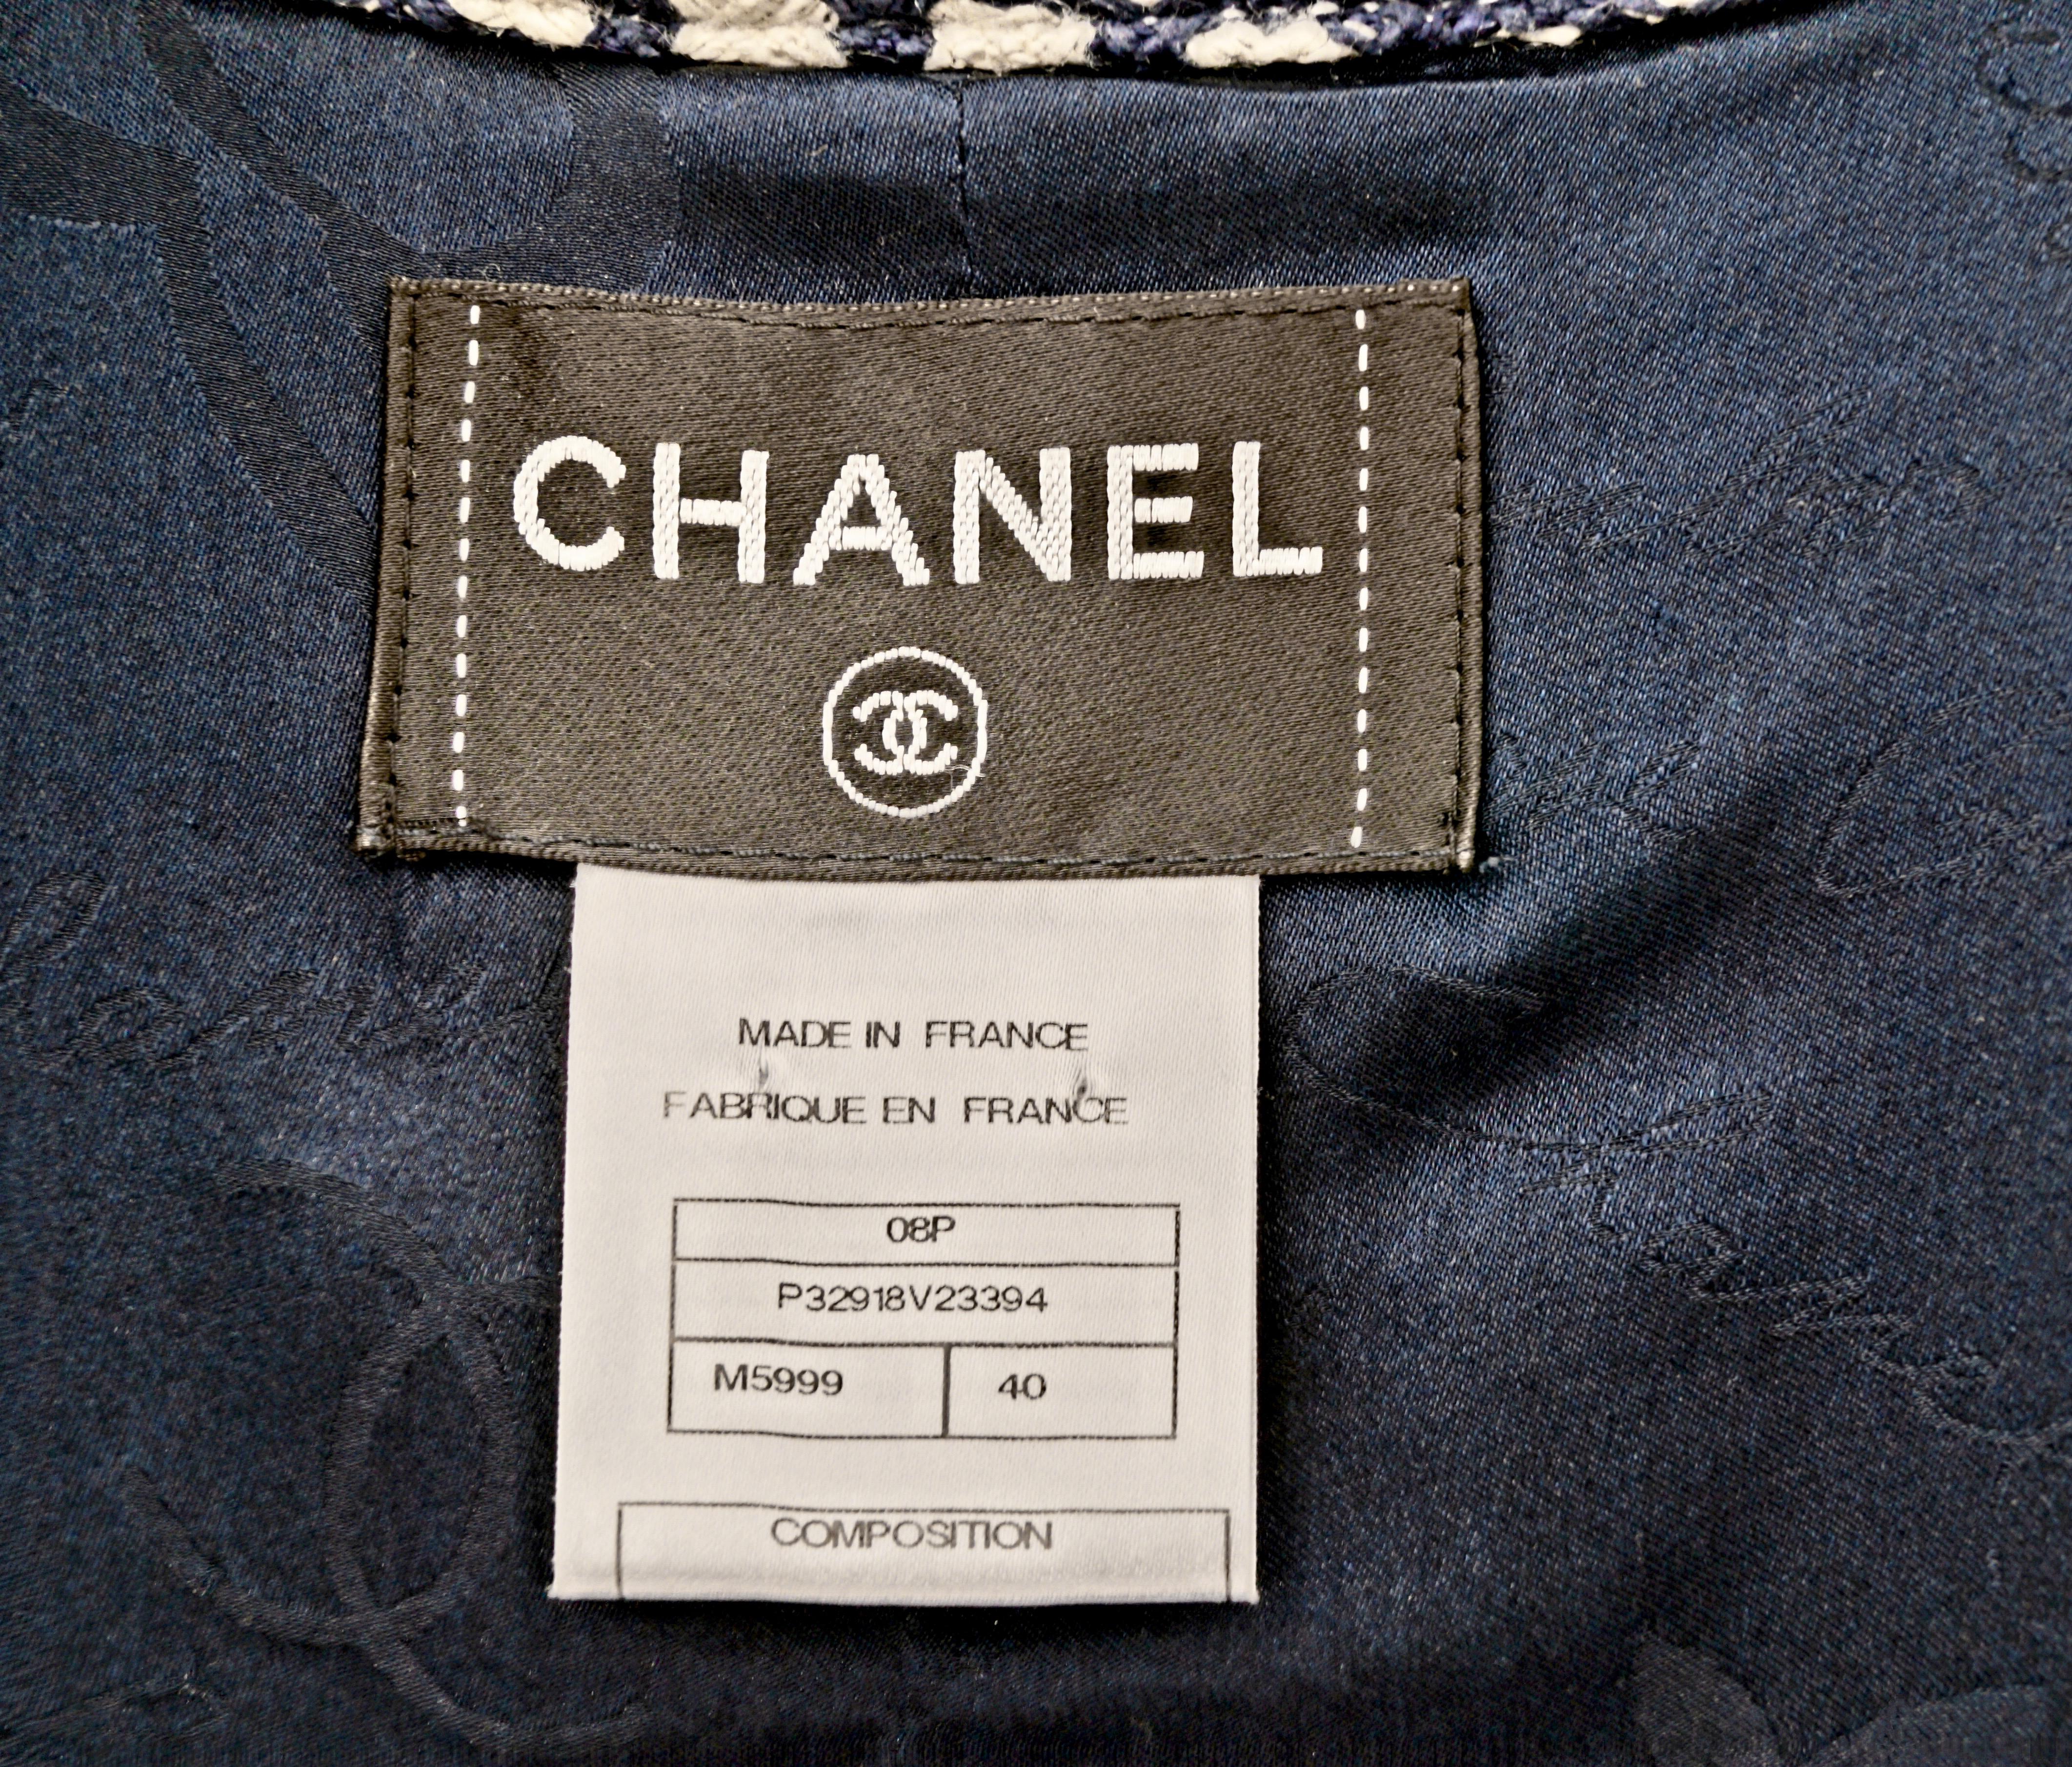 CHANEL blue and white cotton dress FR 40 Spring 2008  08P For Sale 3